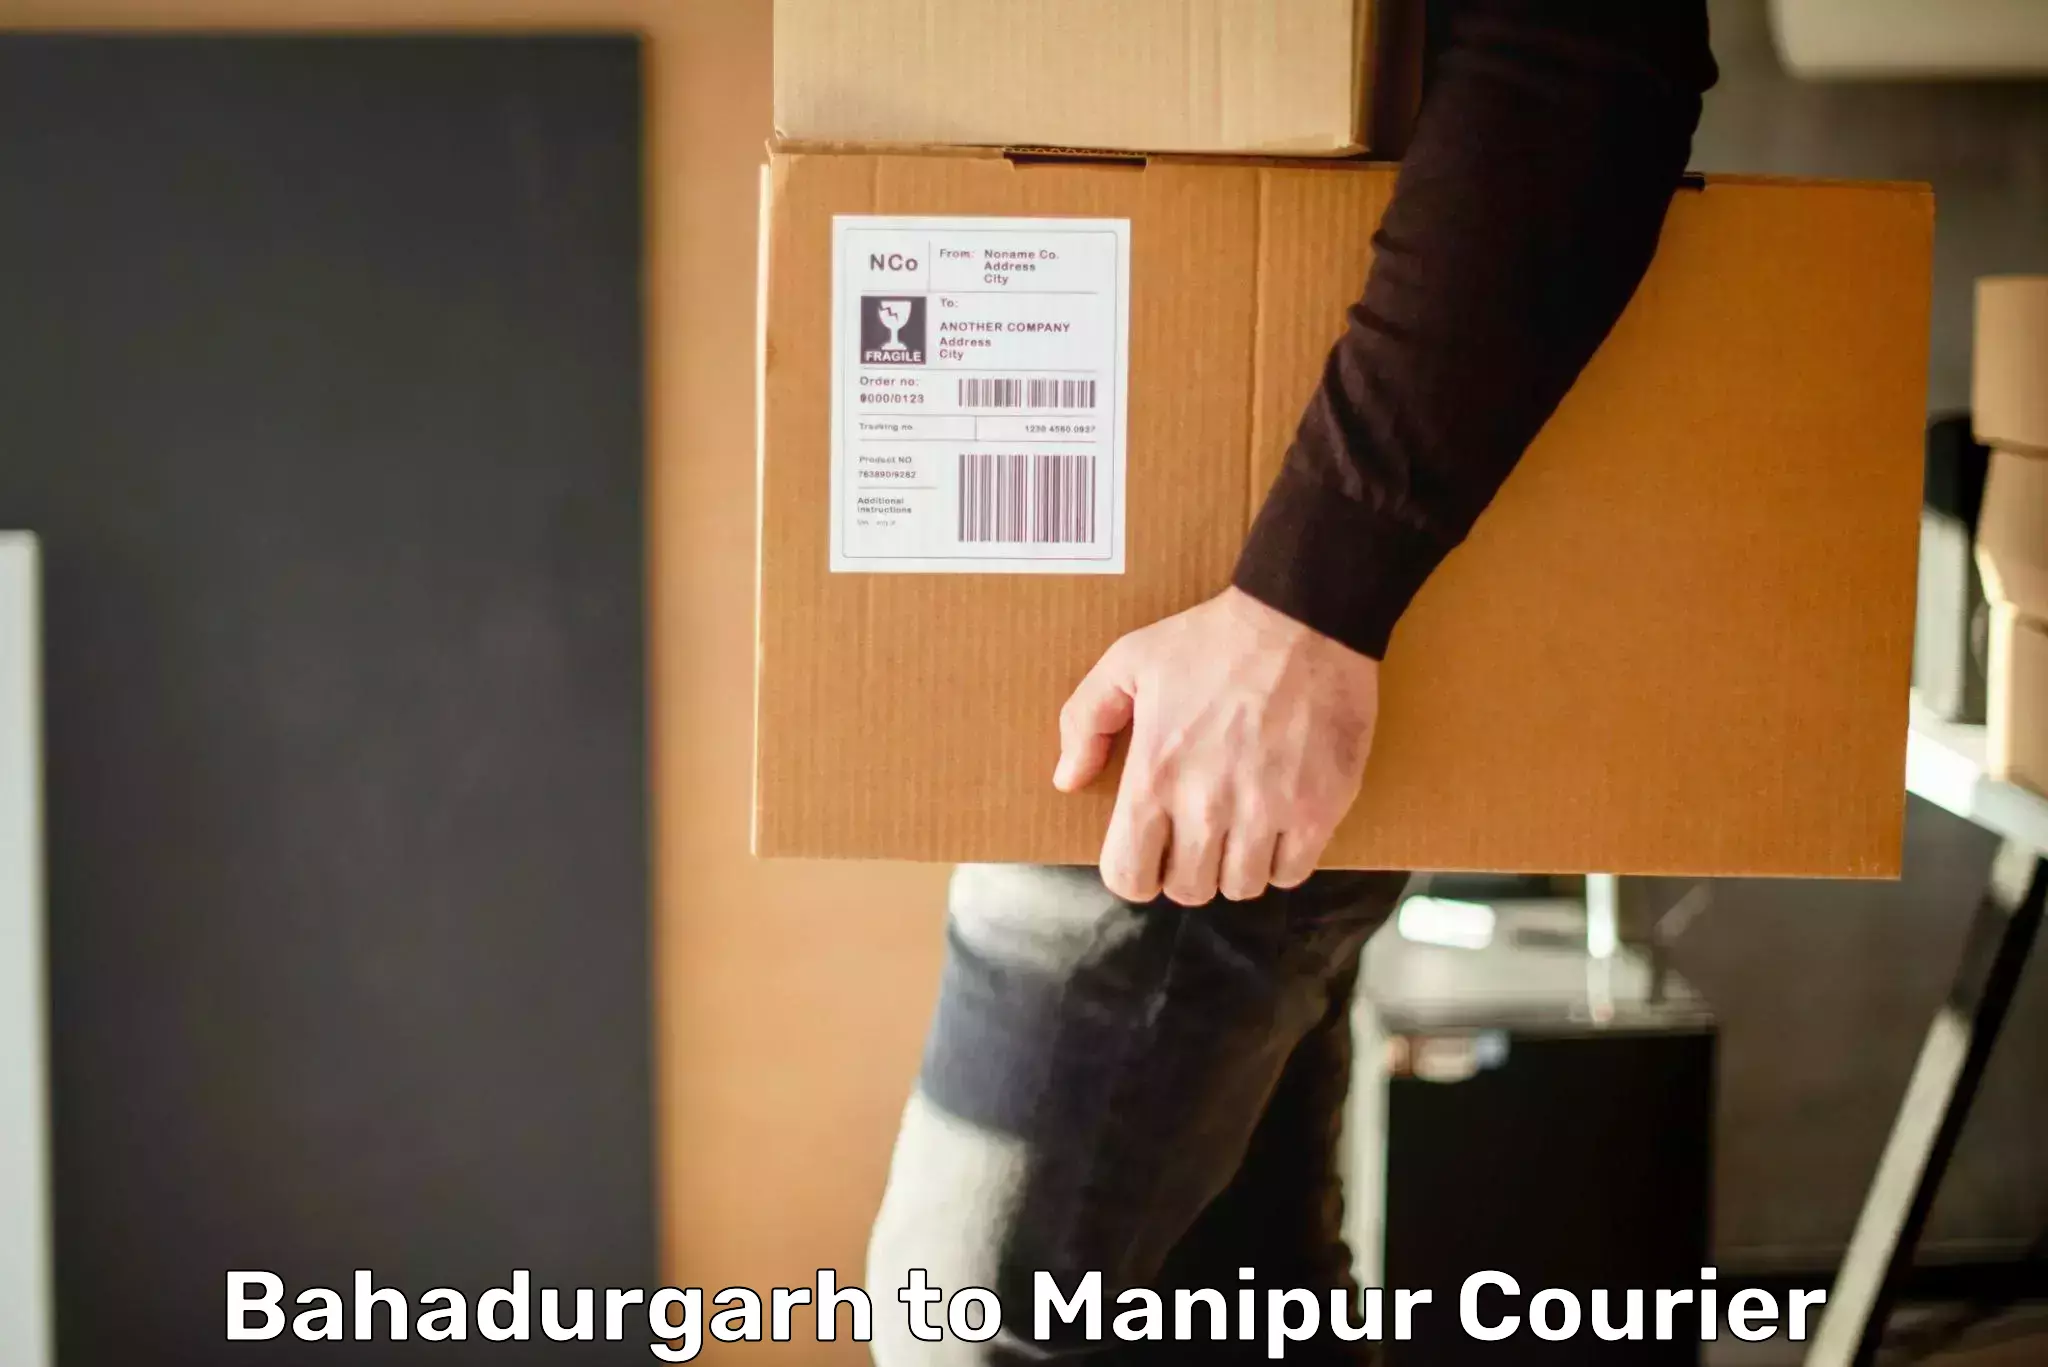 State-of-the-art courier technology Bahadurgarh to Senapati